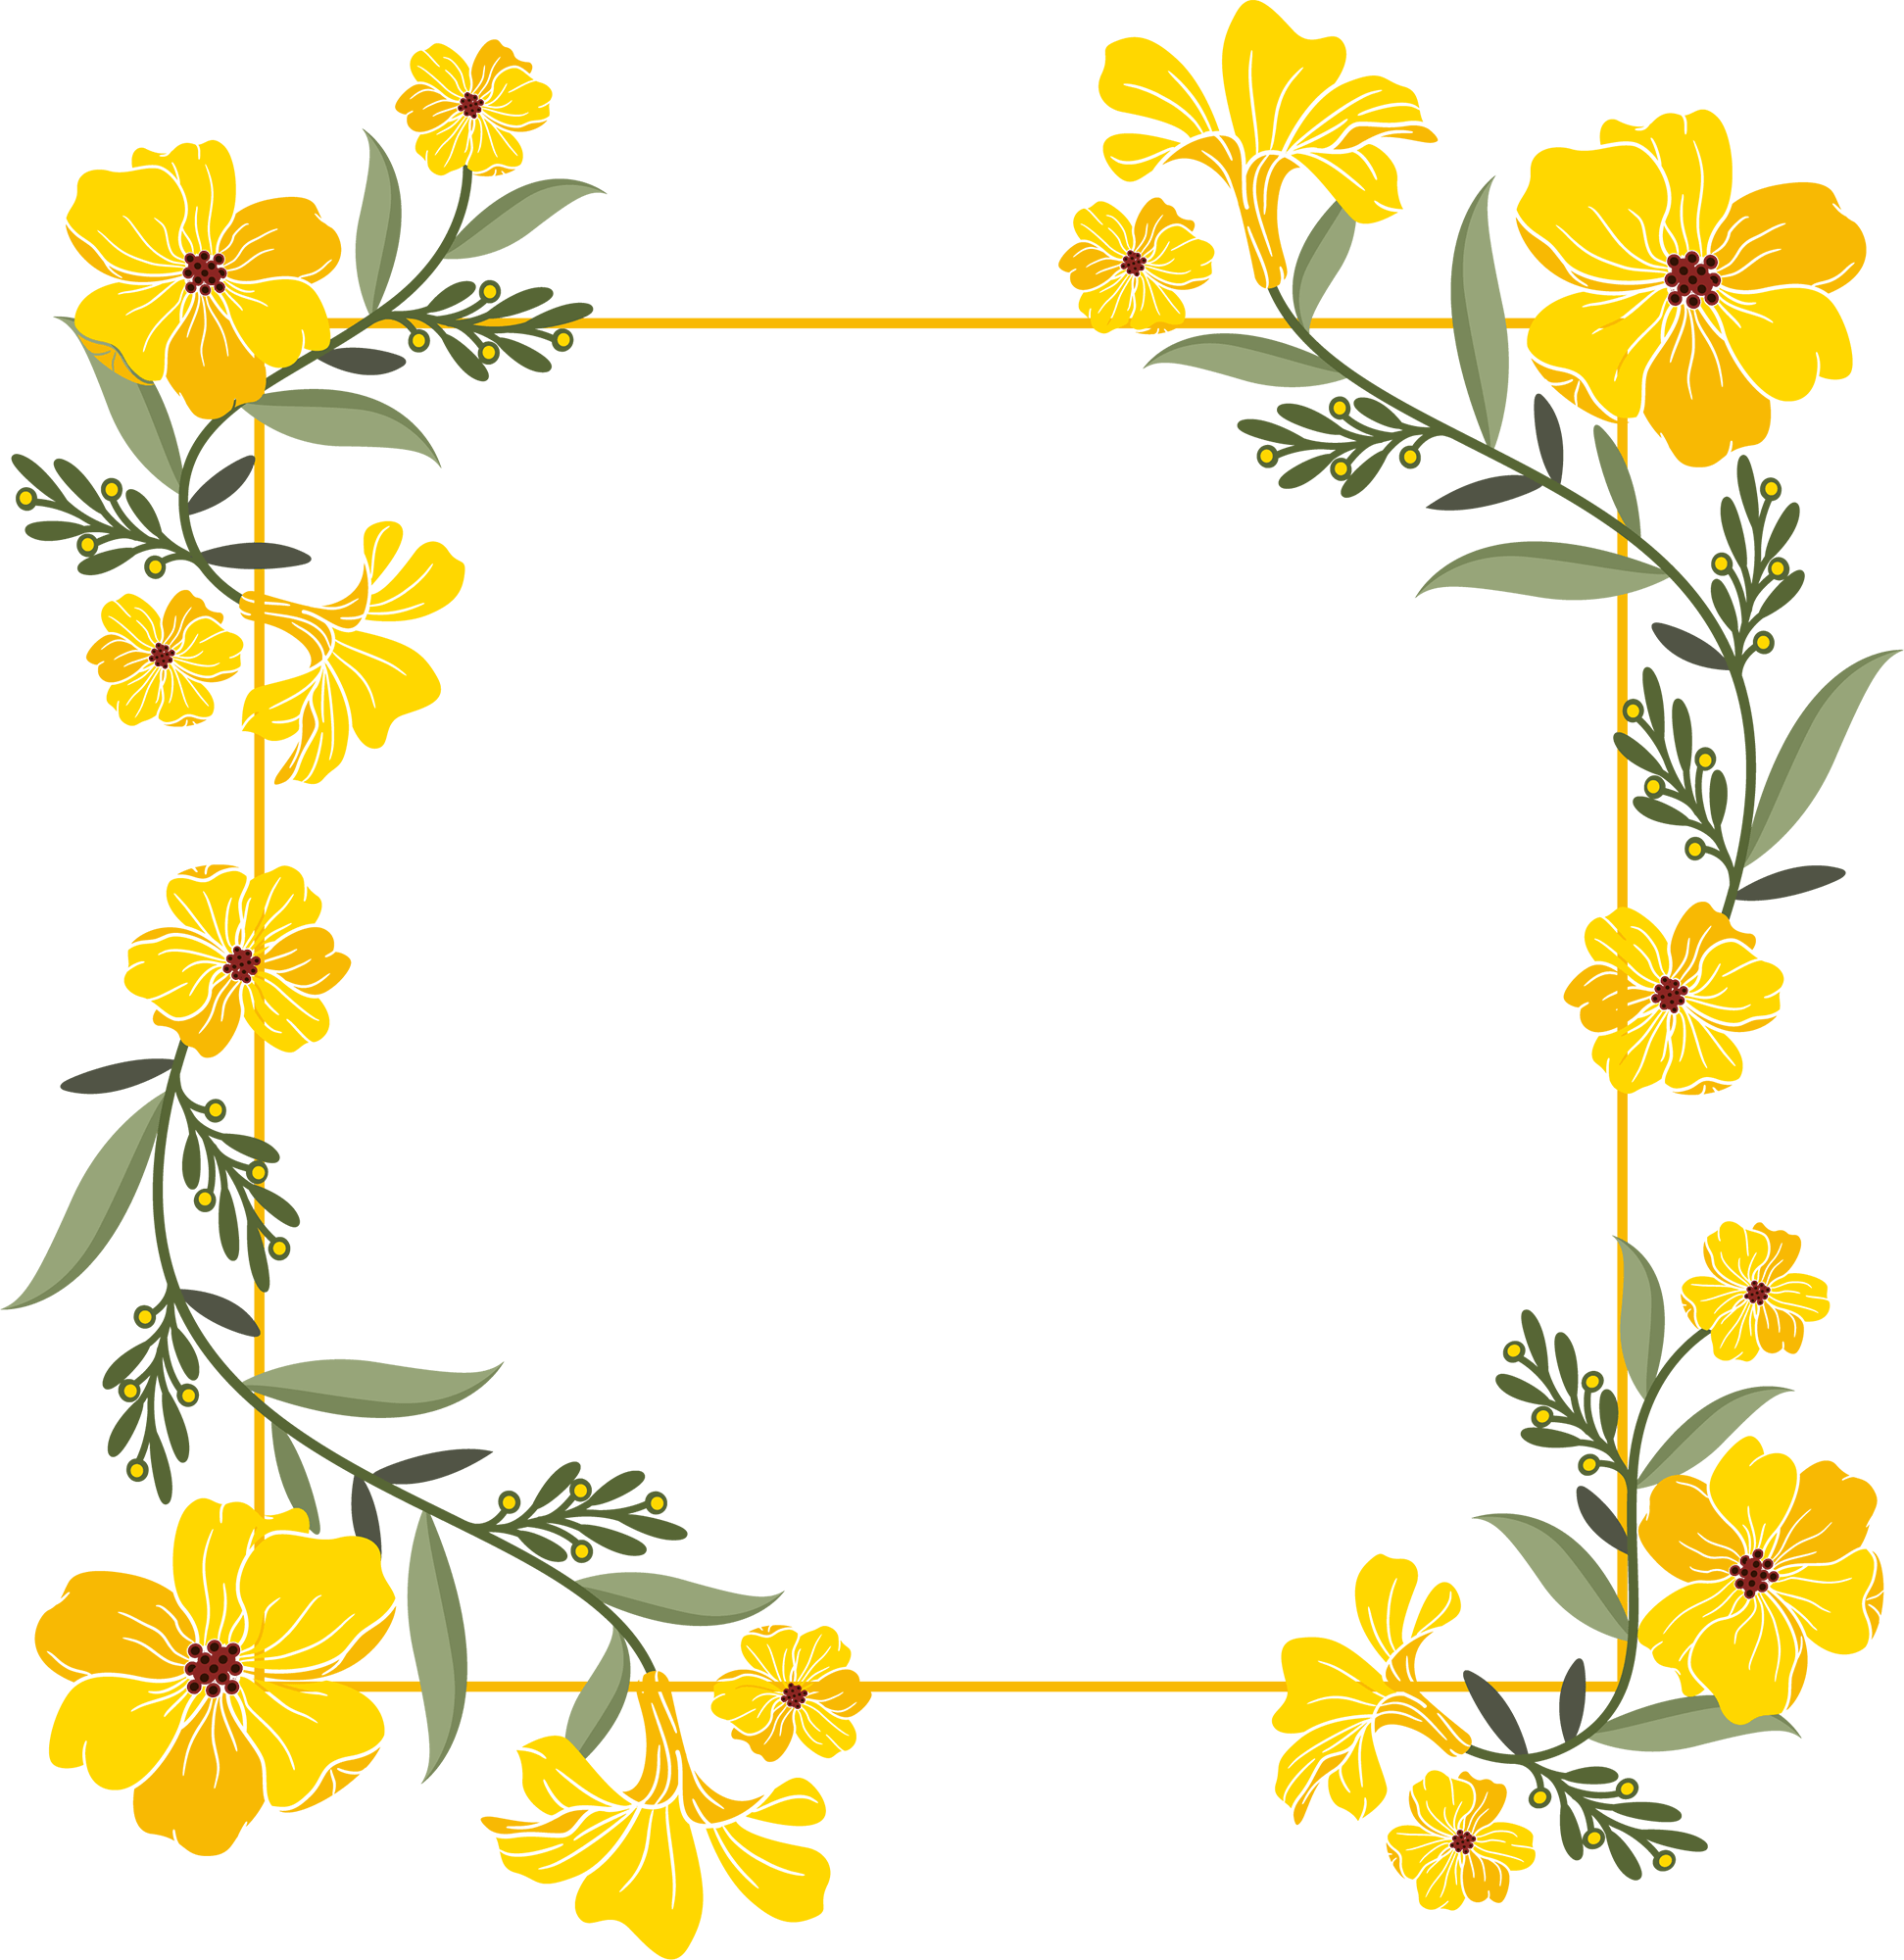 Yellow Flower Frame Image - HD Transparent Frame PNG Free Download